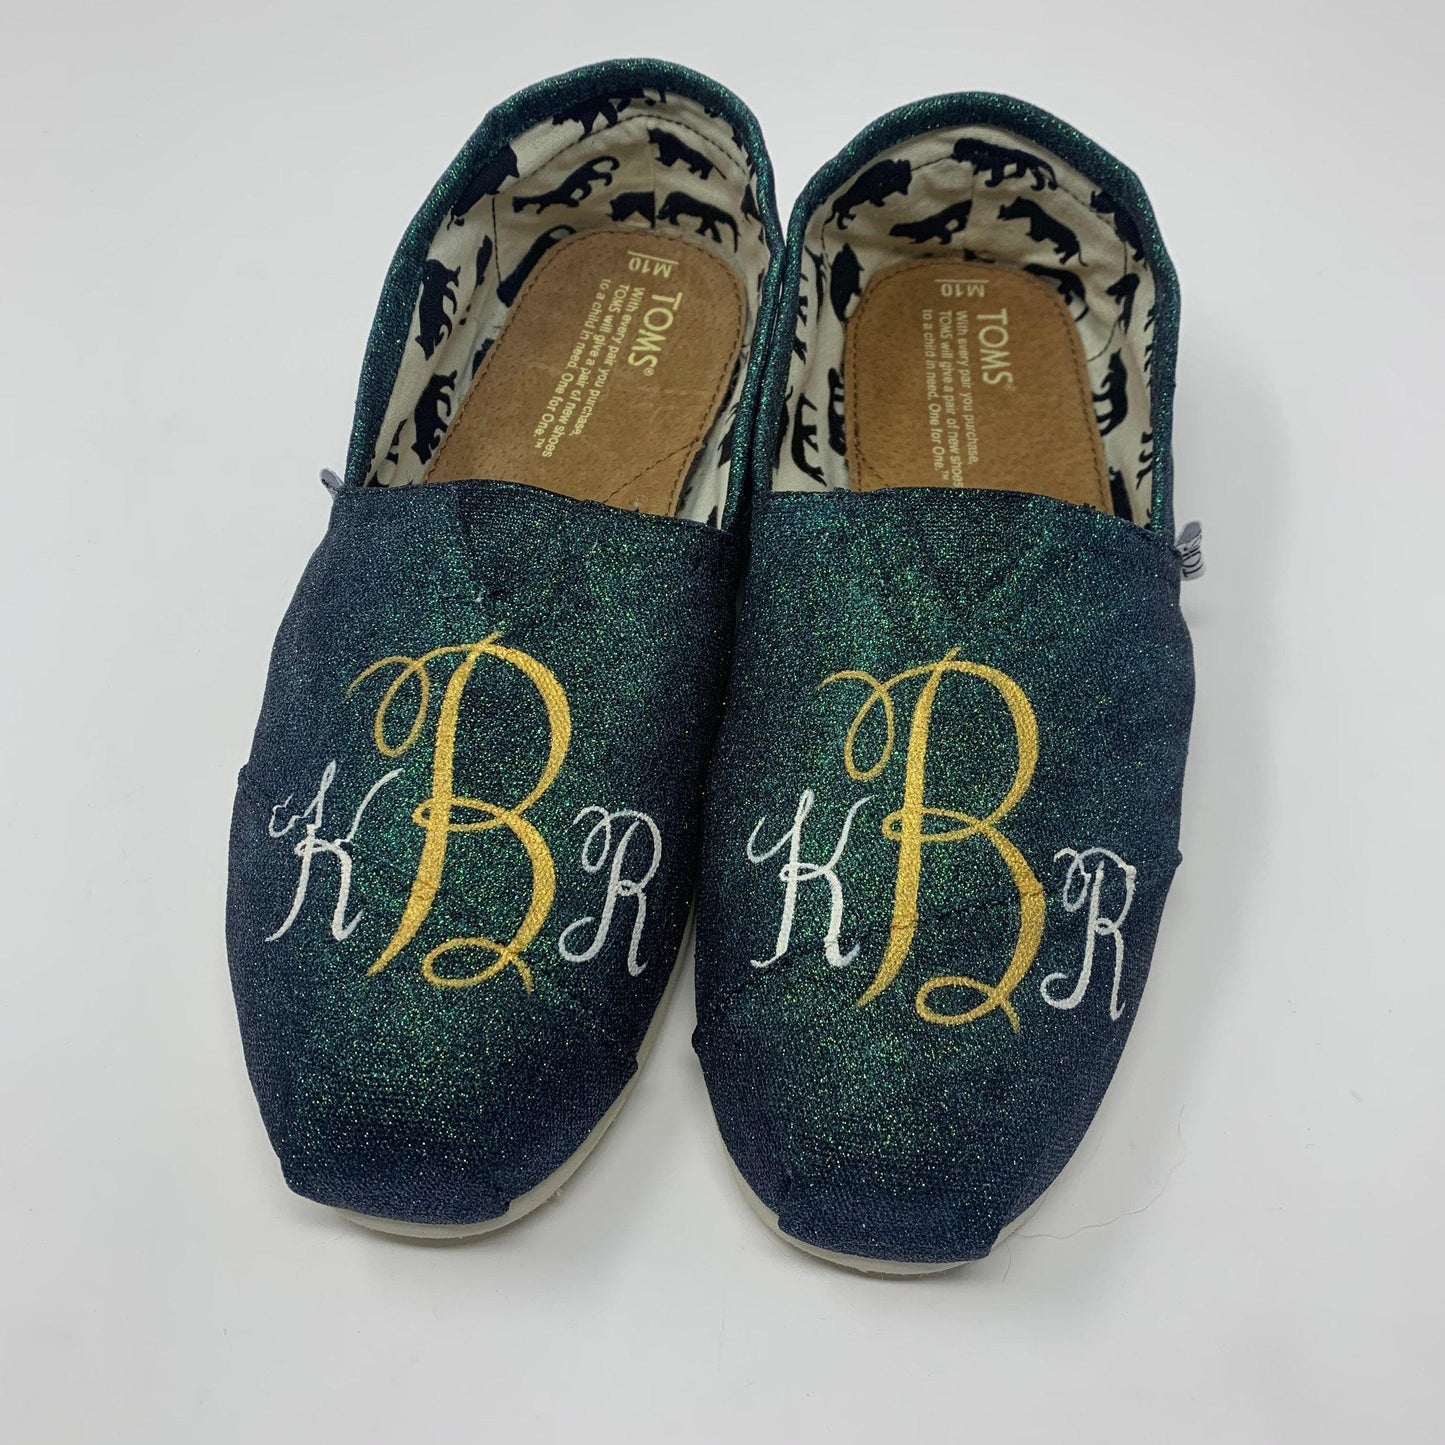 Monogram Shoes with Custom Colors